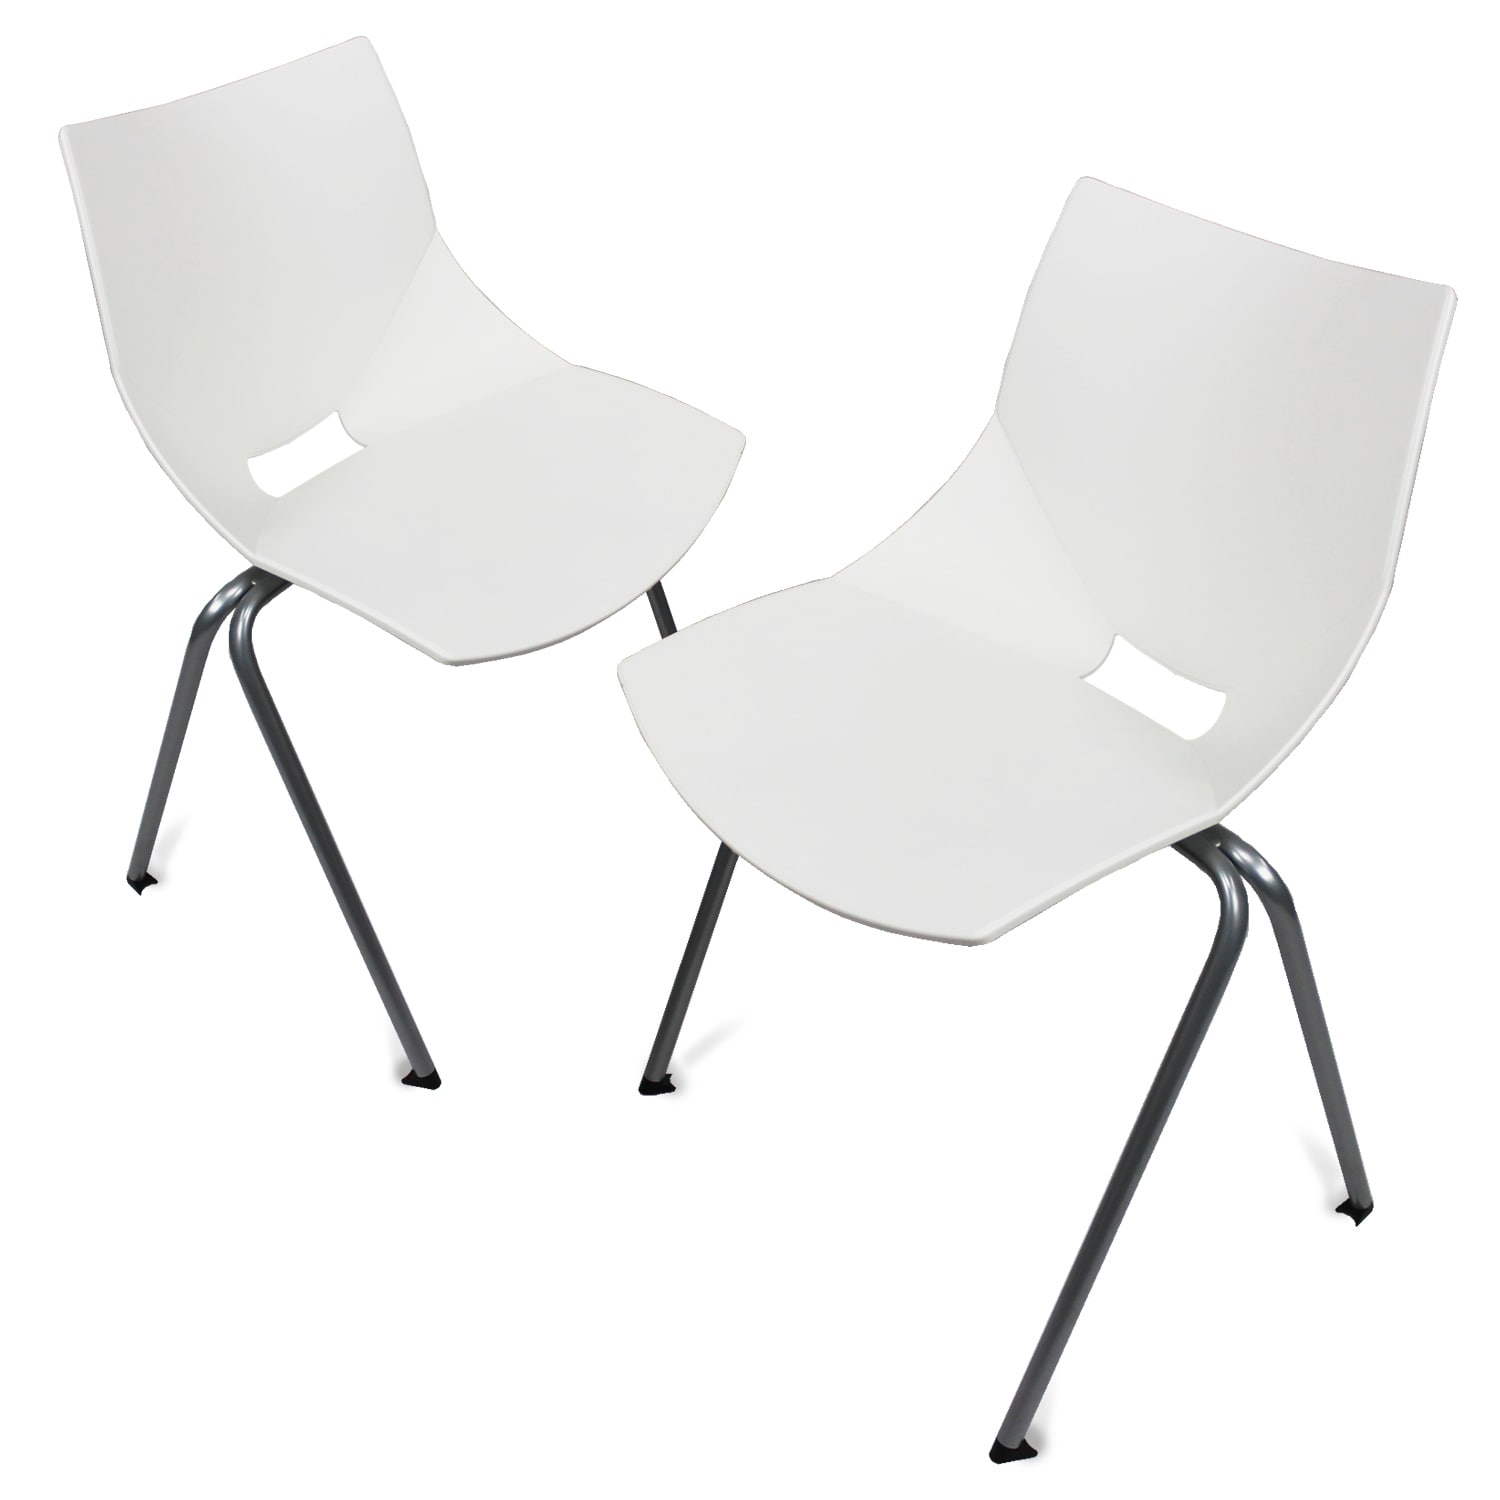 GloDea Shell Outdoor Chair, Beige, Set of 2 - image 4 of 5